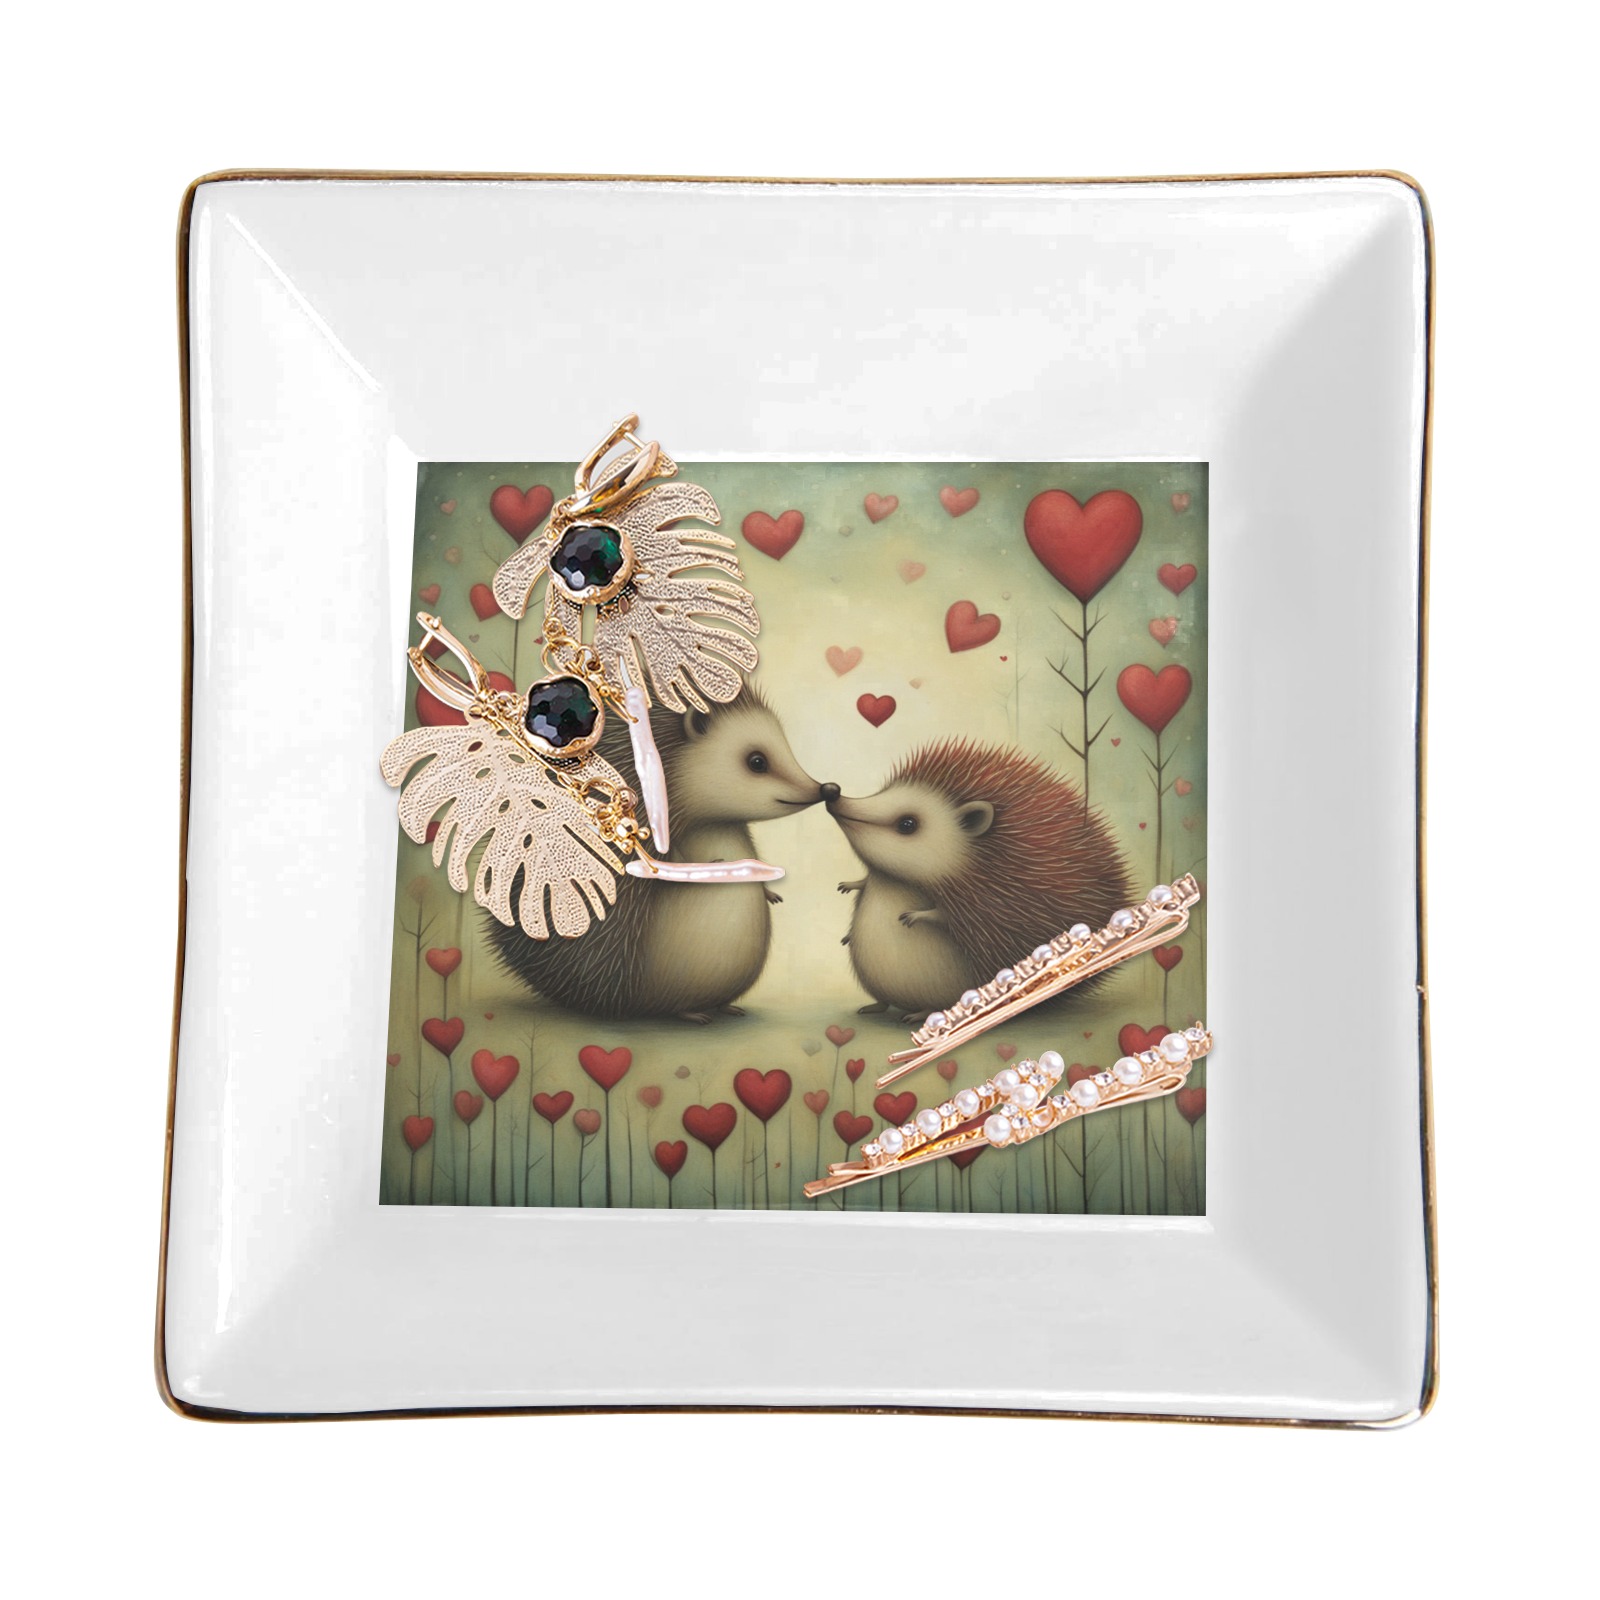 Hedgehog Love 1 Square Jewelry Tray with Golden Edge